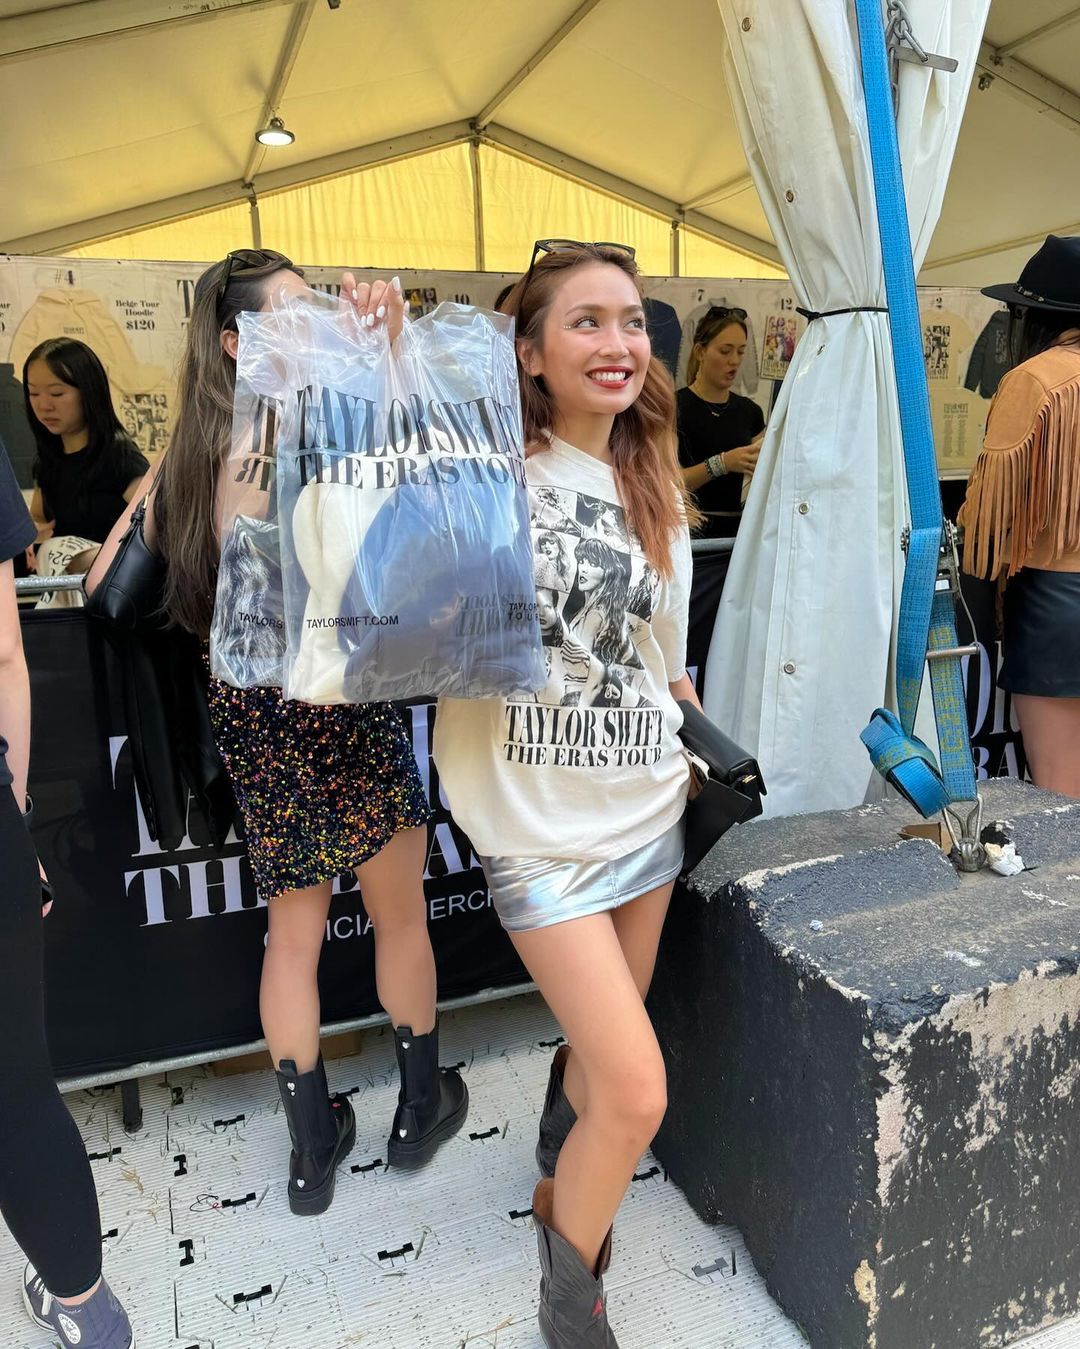 Kathryn with Taylor Swift merchandise